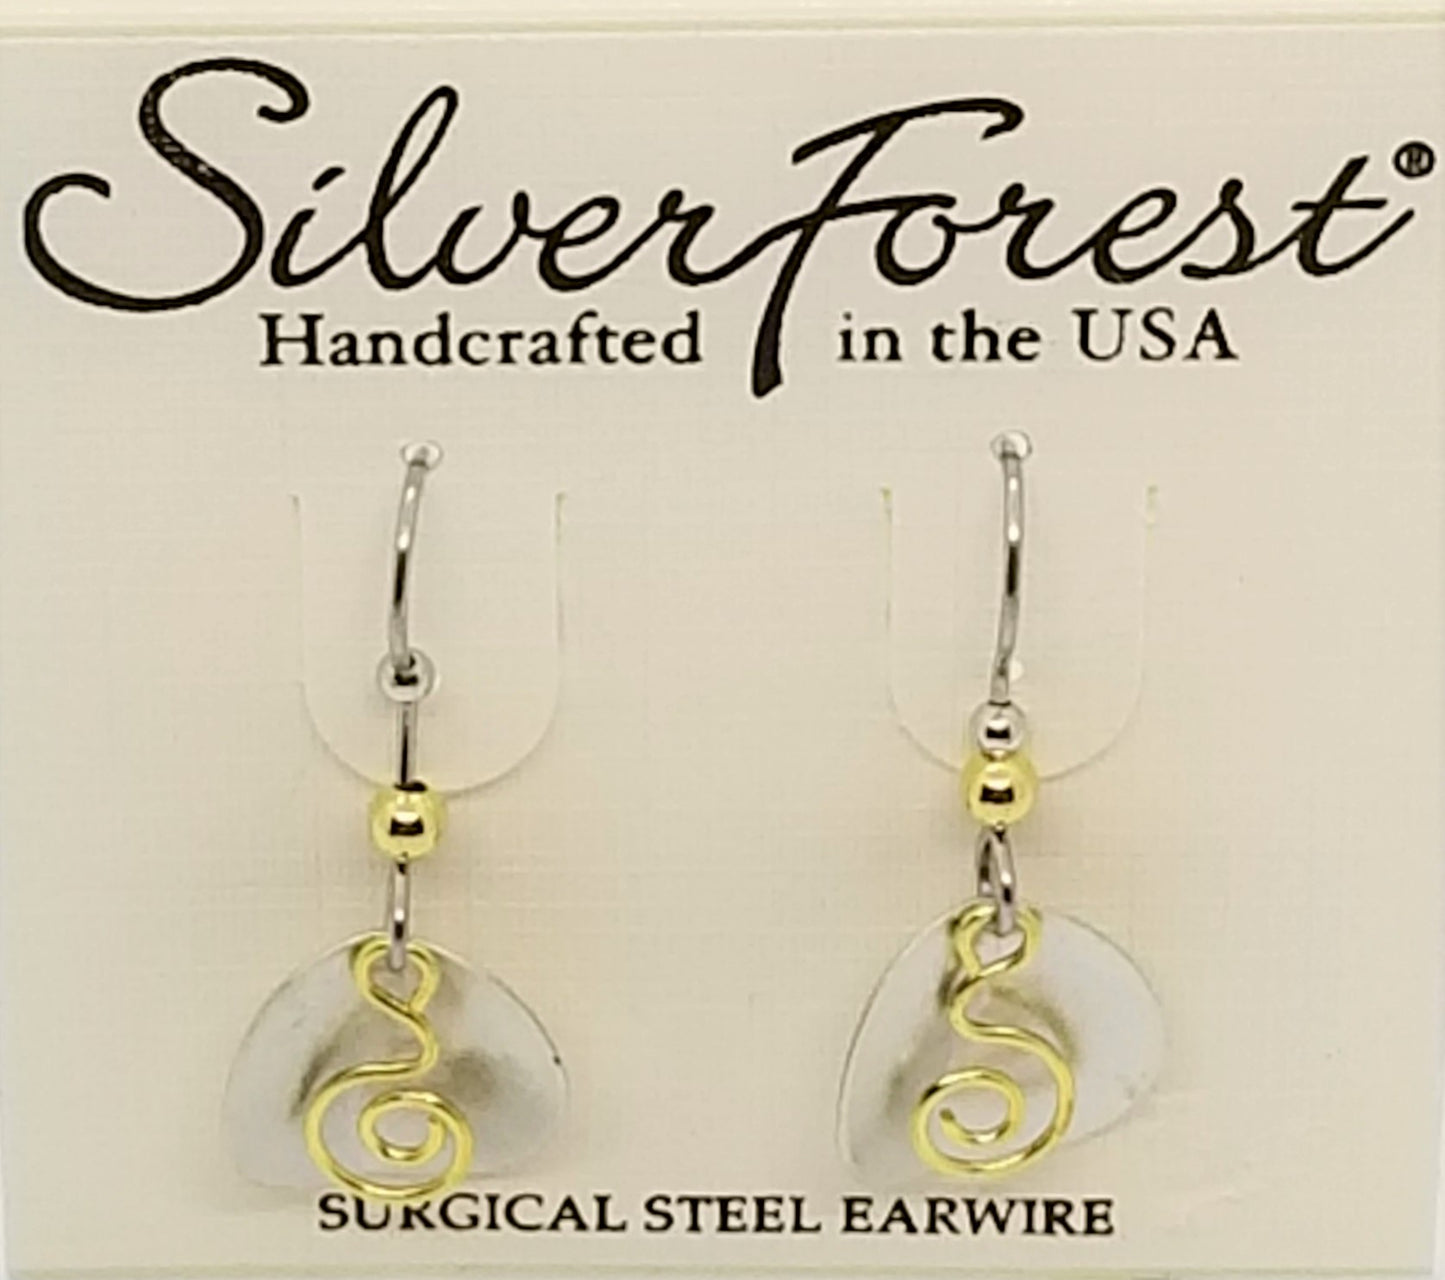 Silver forest handcrafted surgical steel silver and gold plated earrings